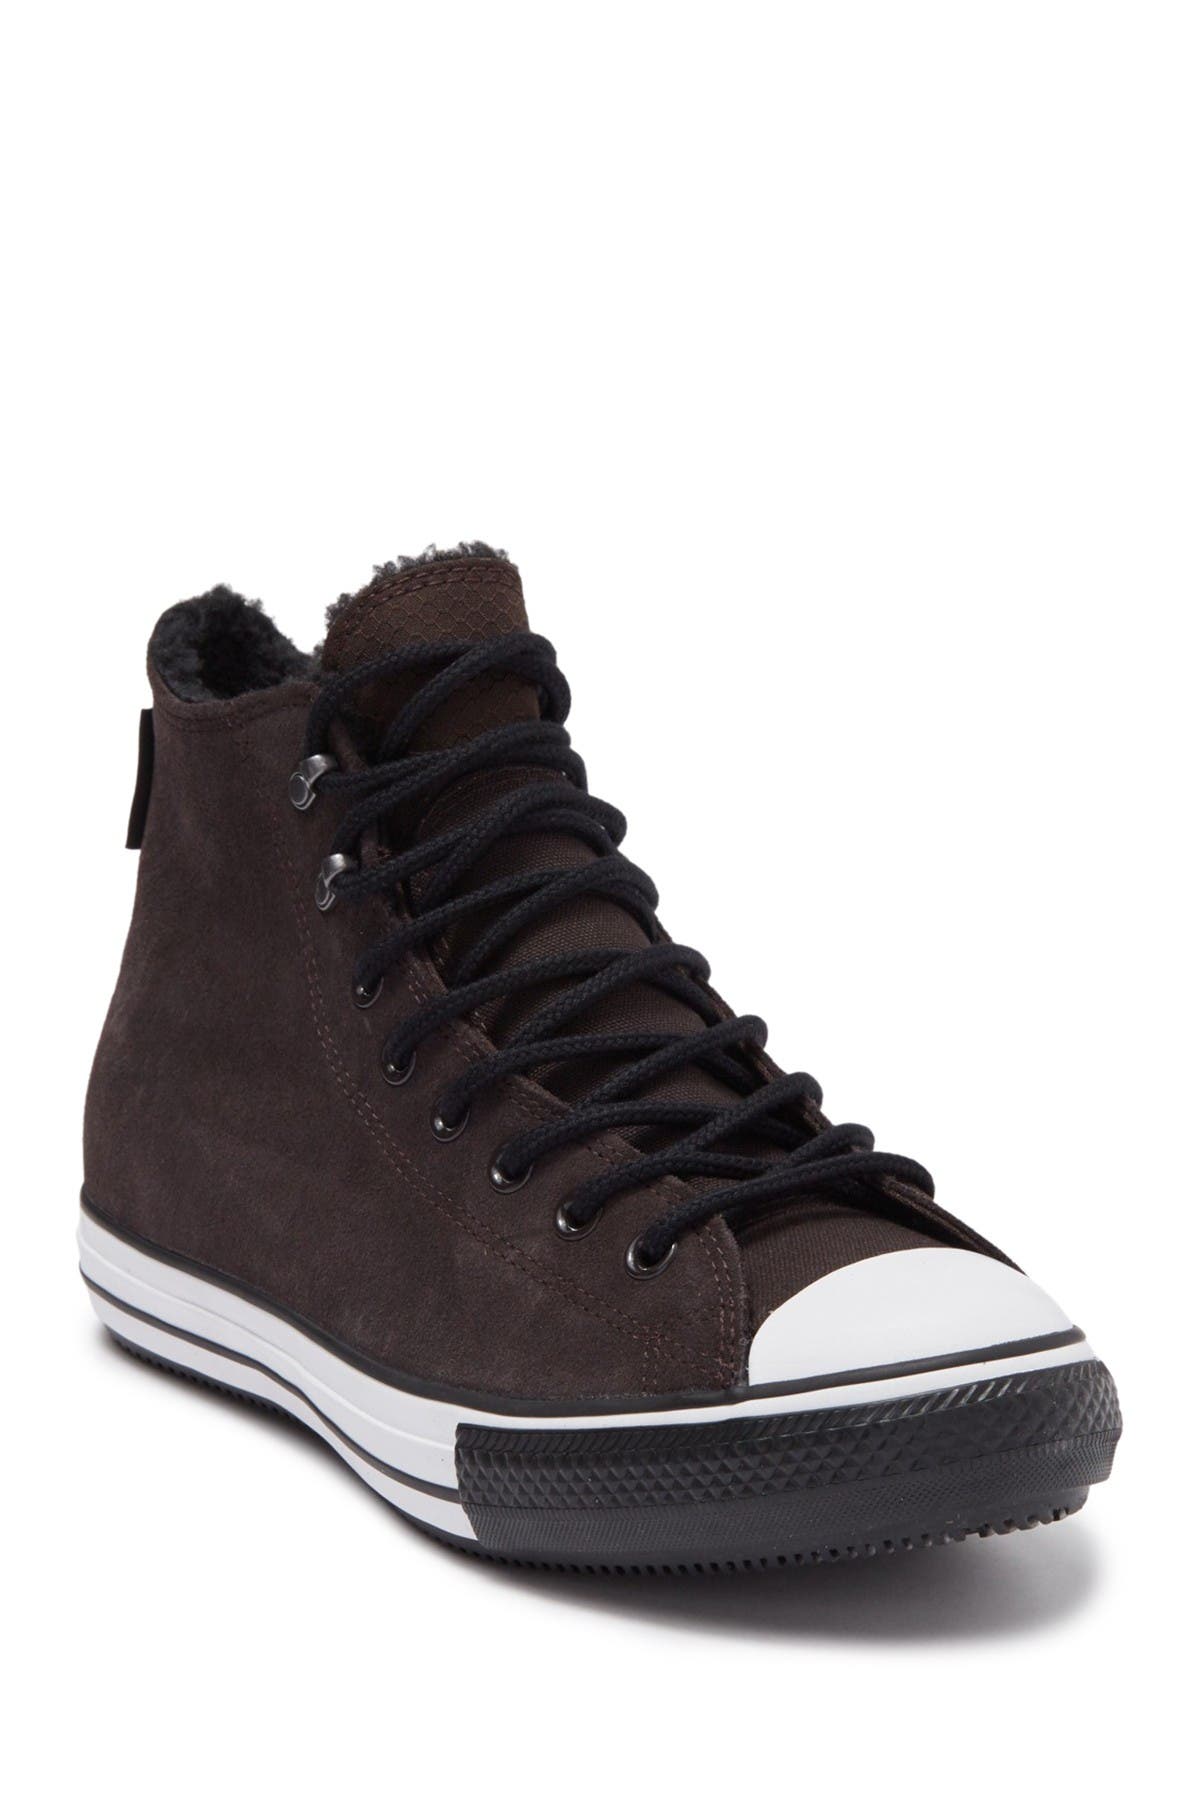 chuck taylor winter shoes